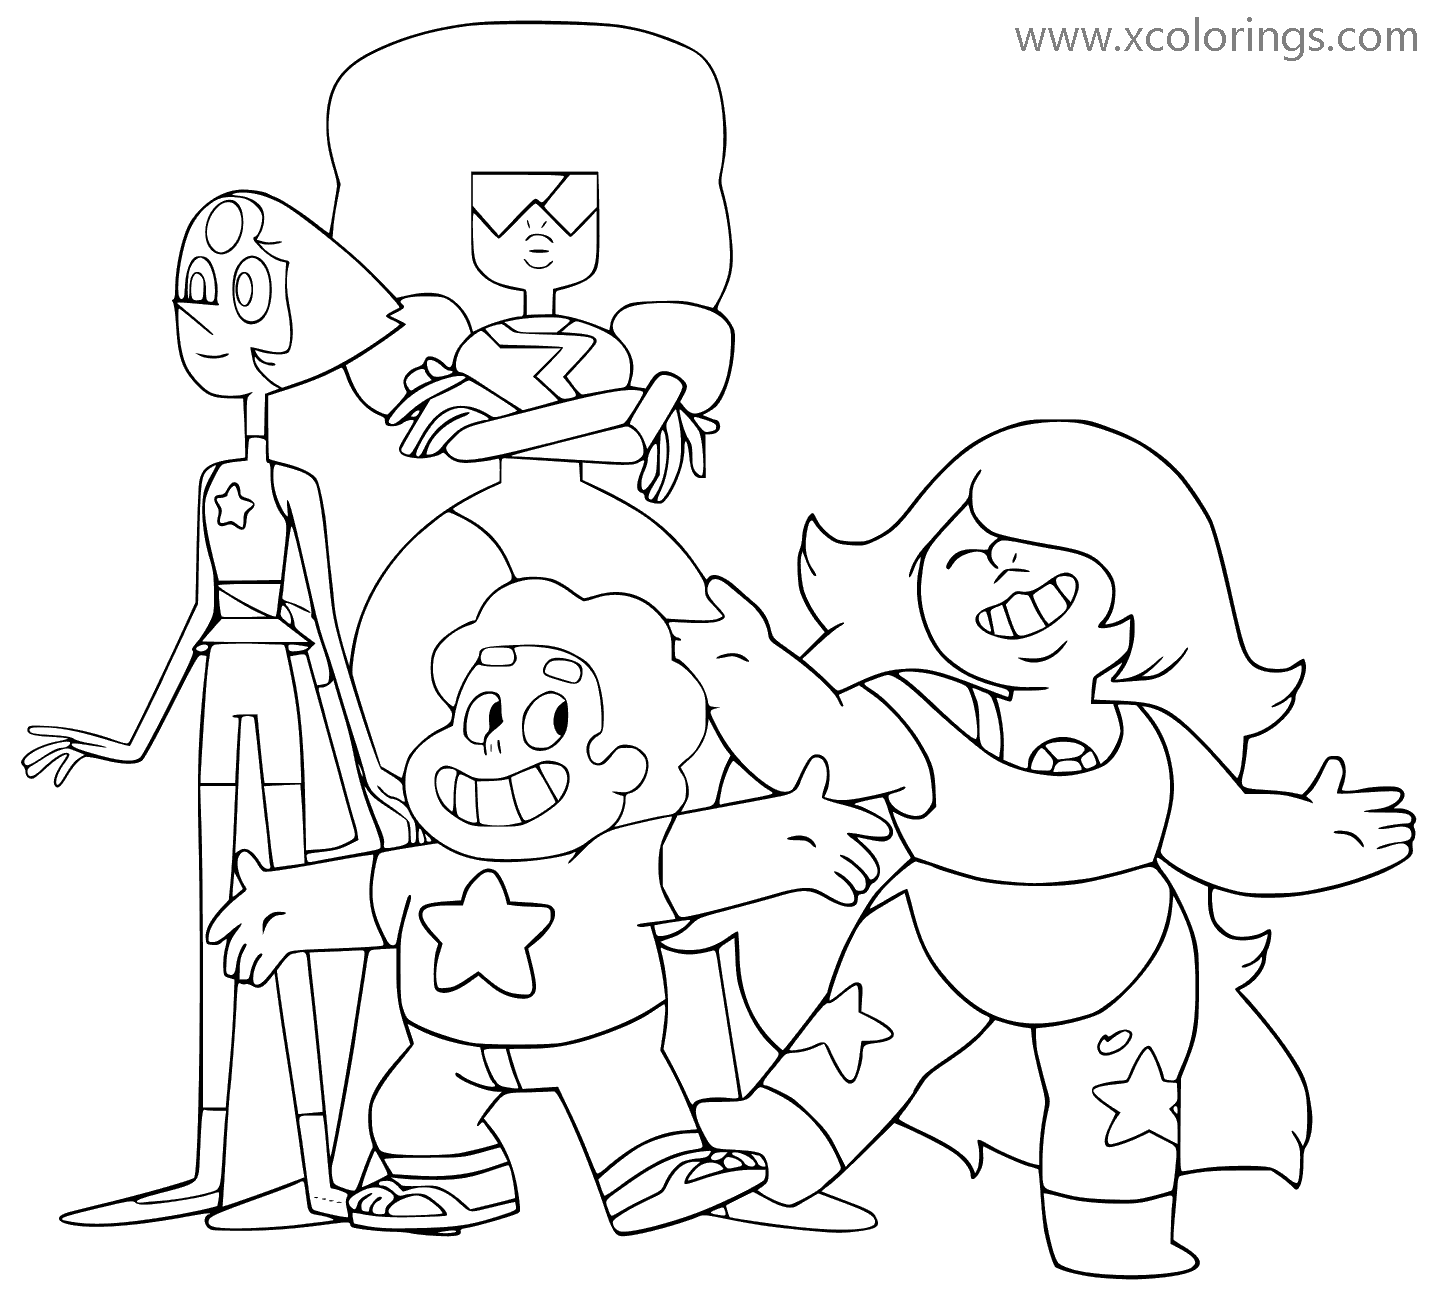 Free Crystal Gems from Steven Universe Coloring Pages printable